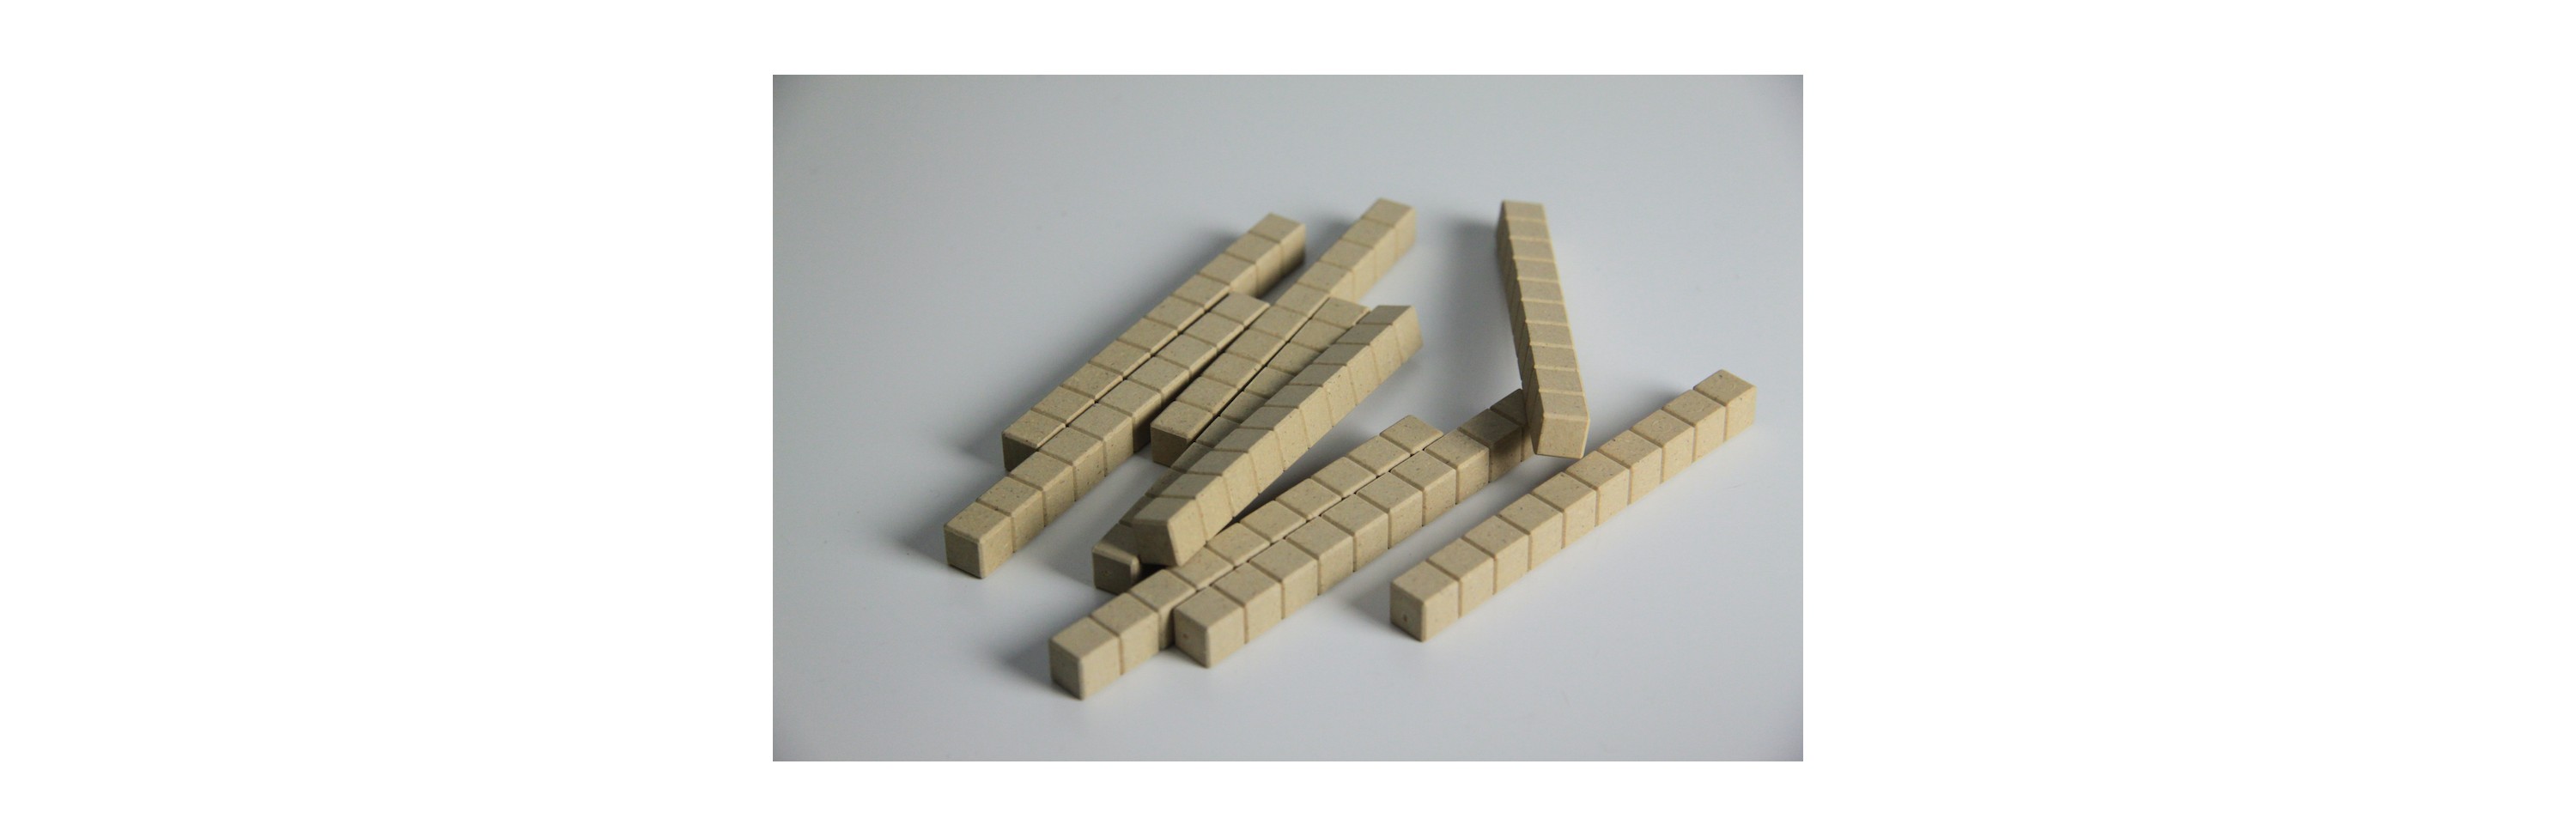 Wissner® active learning - Dienes Base Ten Rods in natural colours (100 pcs) RE-Wood®